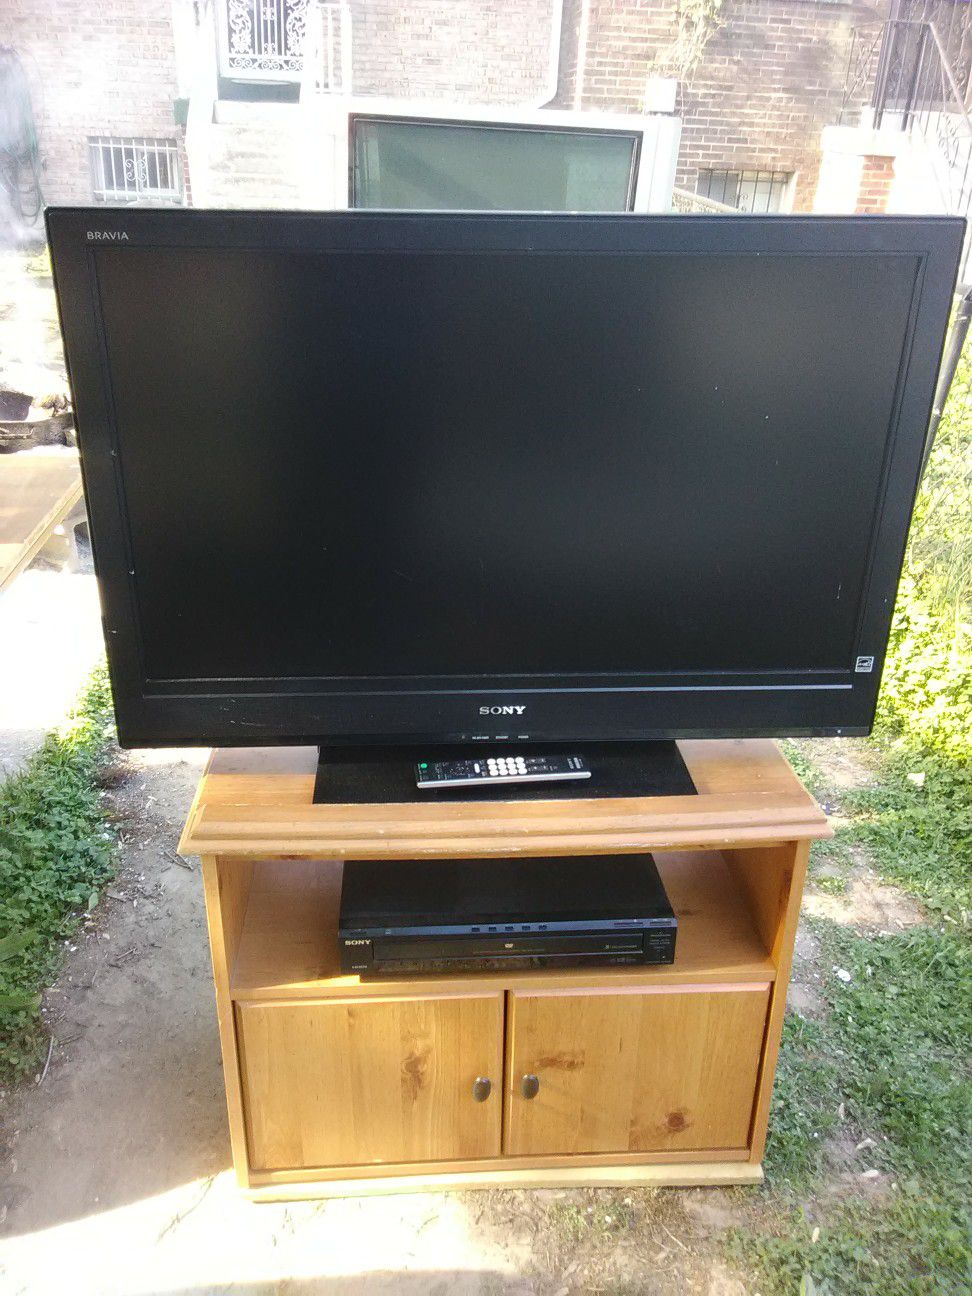 Sony 40 inch LCD TV with remote control and 2 HDMI ports